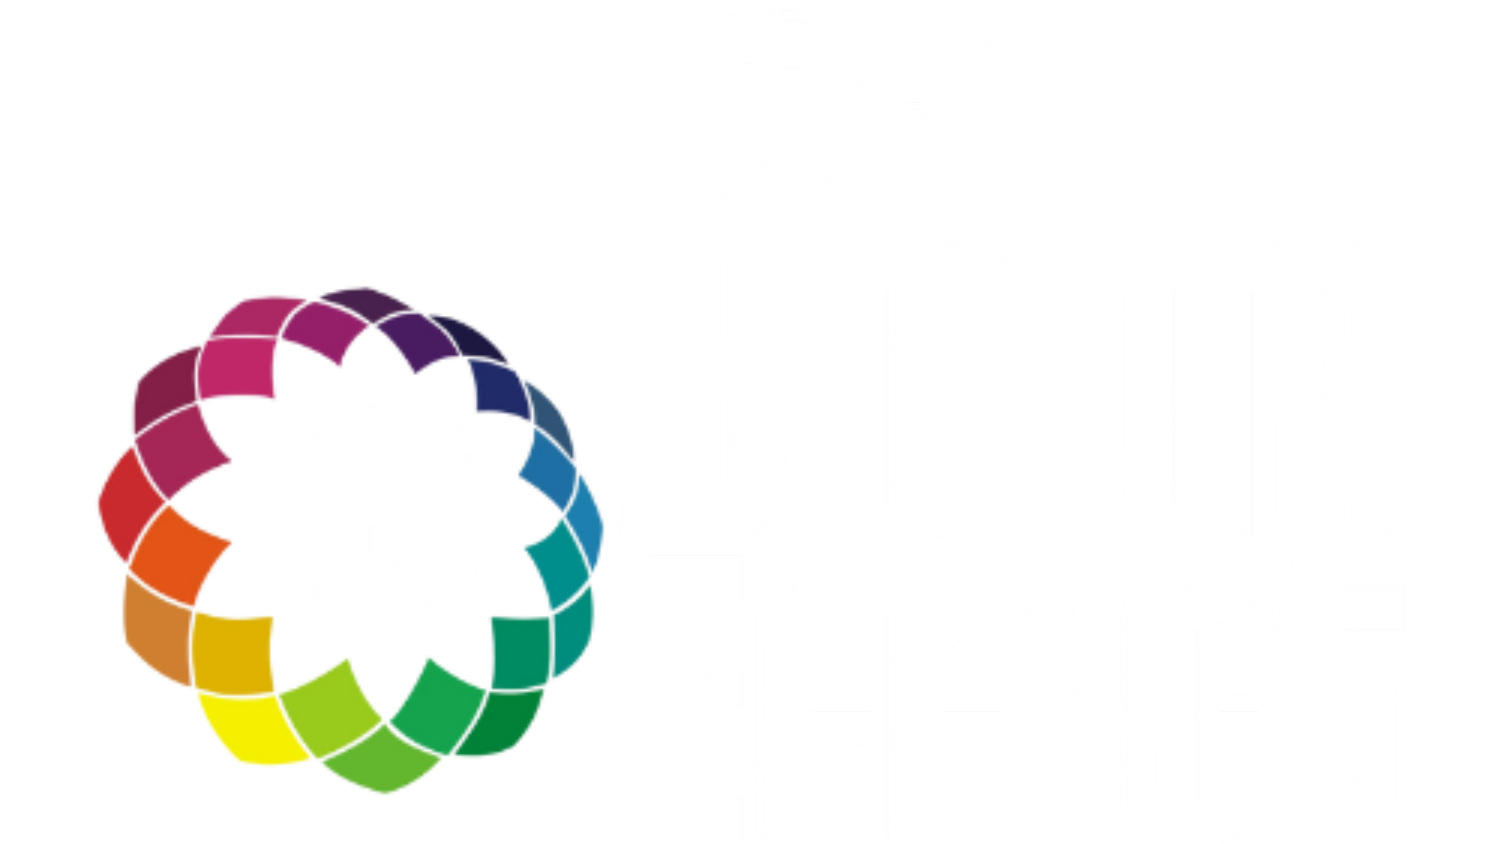 The Bloom Effect